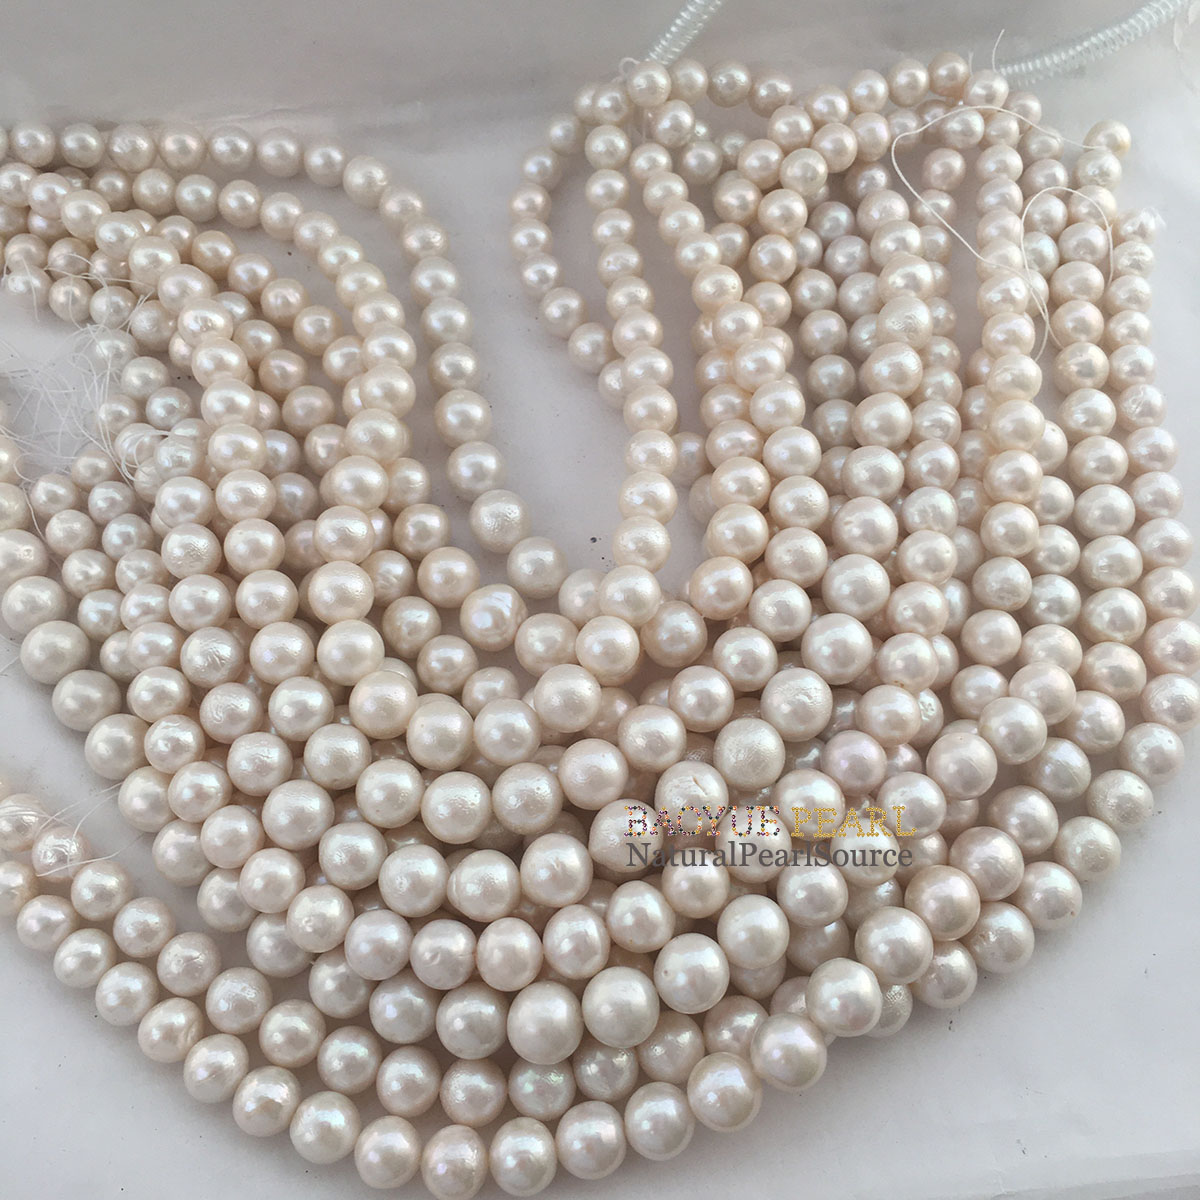 11-15mm Natural Baroque freshwater pearl 16 inch loose pearl in strand.